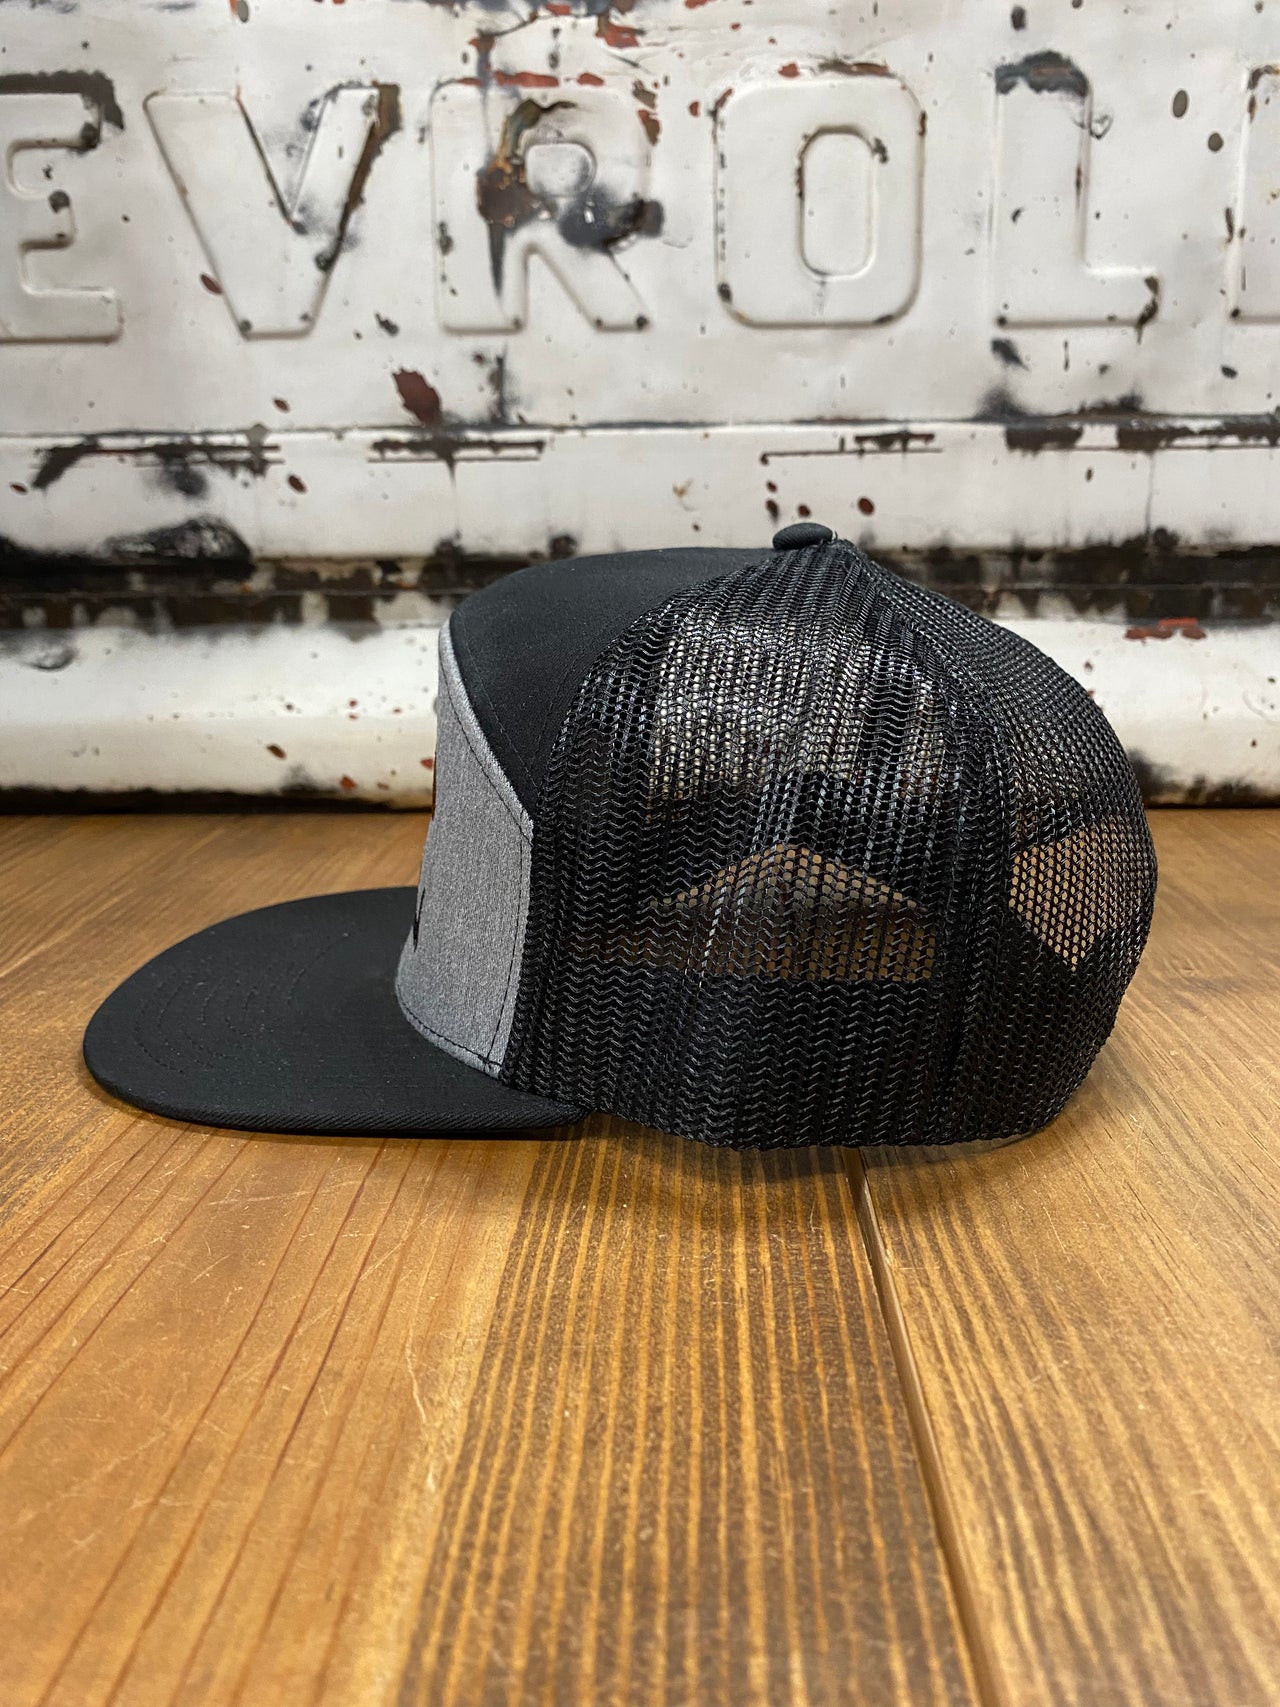 Heather Grey/Black Southern Local Wood Duck 7 Panel Cap - A blend of classic style and Southern charm. Distinctive wood duck embroidery adds character to this meticulously crafted cap. Comfortable seven-panel construction, premium materials, and versatile design for city or outdoor adventures.